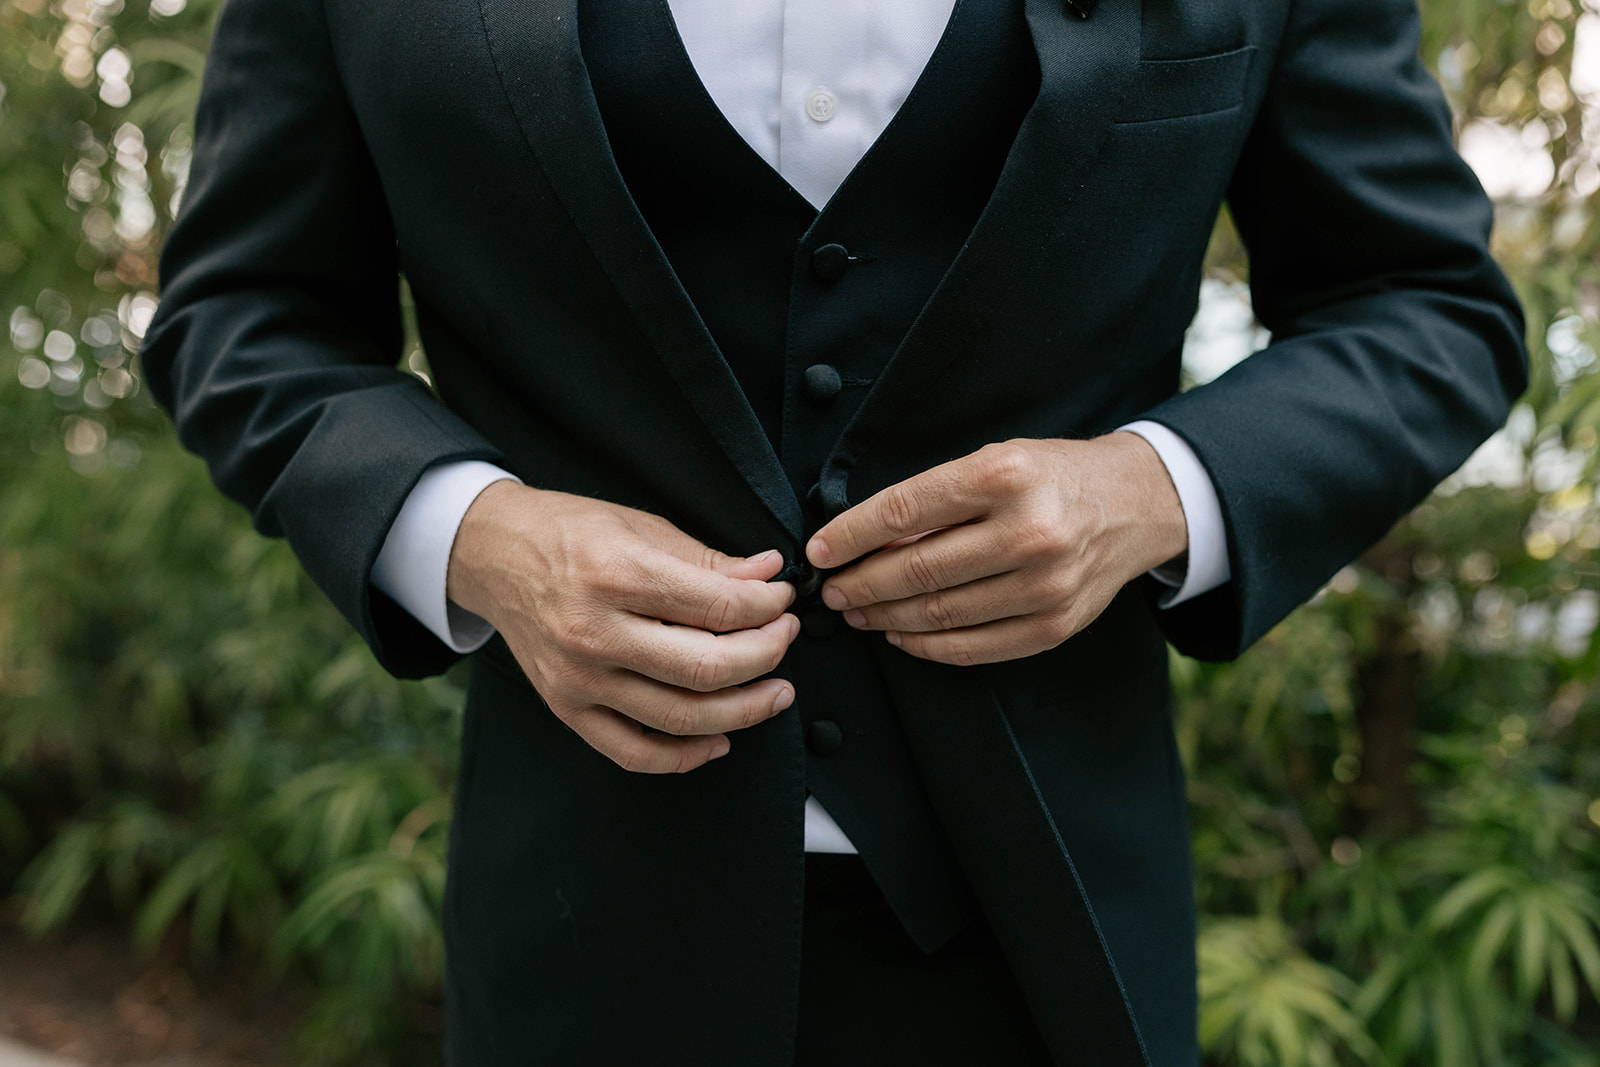 socal placentia california wedding alta vista country club black and white tux suit tie rose boutonniere getting ready